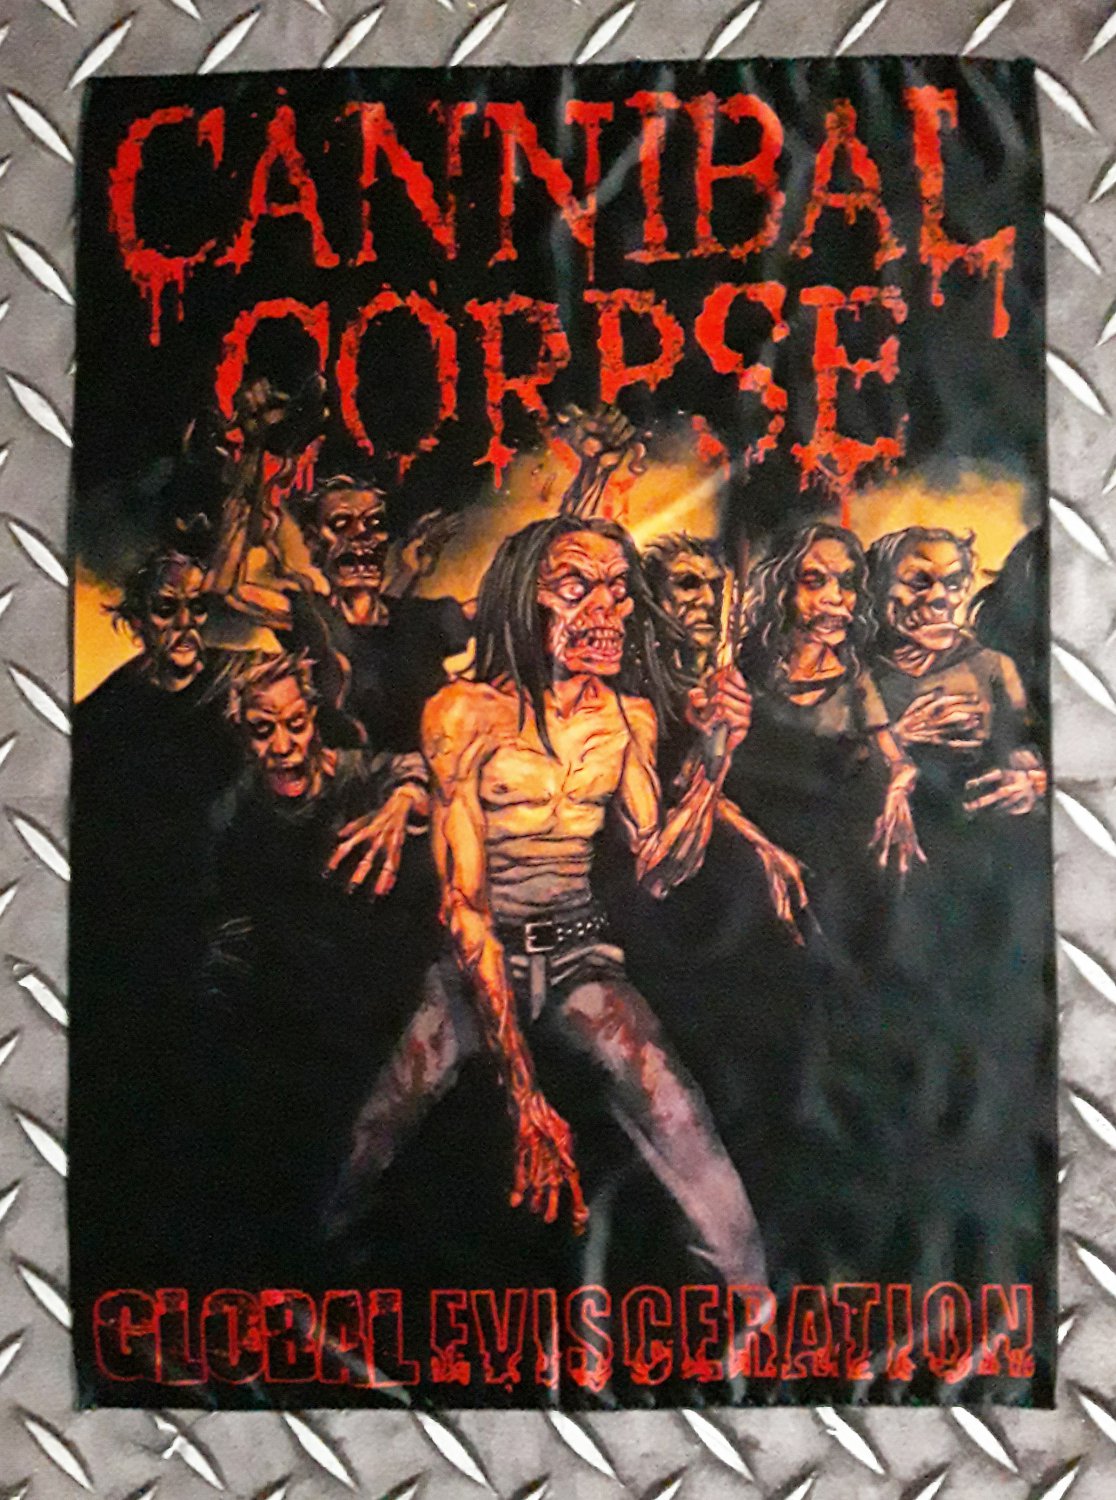 CANNIBAL CORPSE - Global evisceration FLAG Heavy death black metal cloth poster